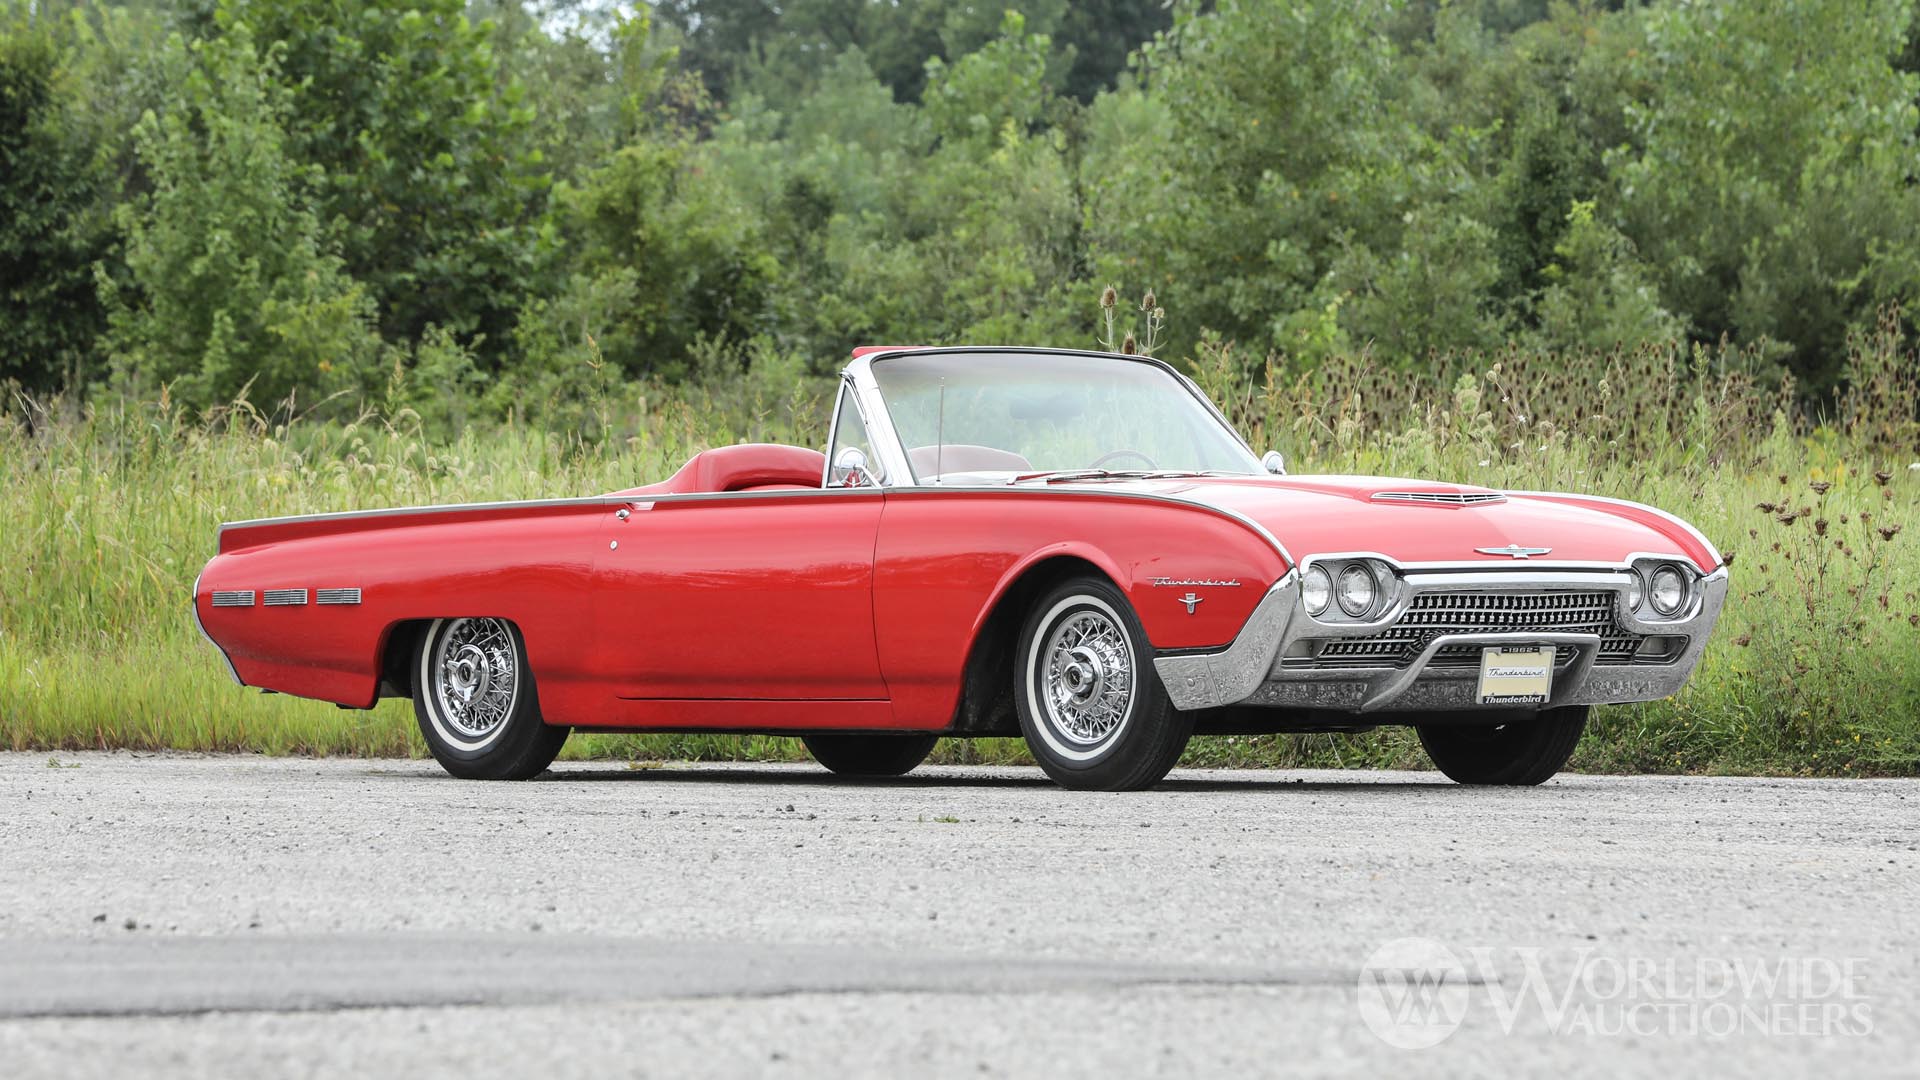 1962 Ford Thunderbird 'Sports Roadster'